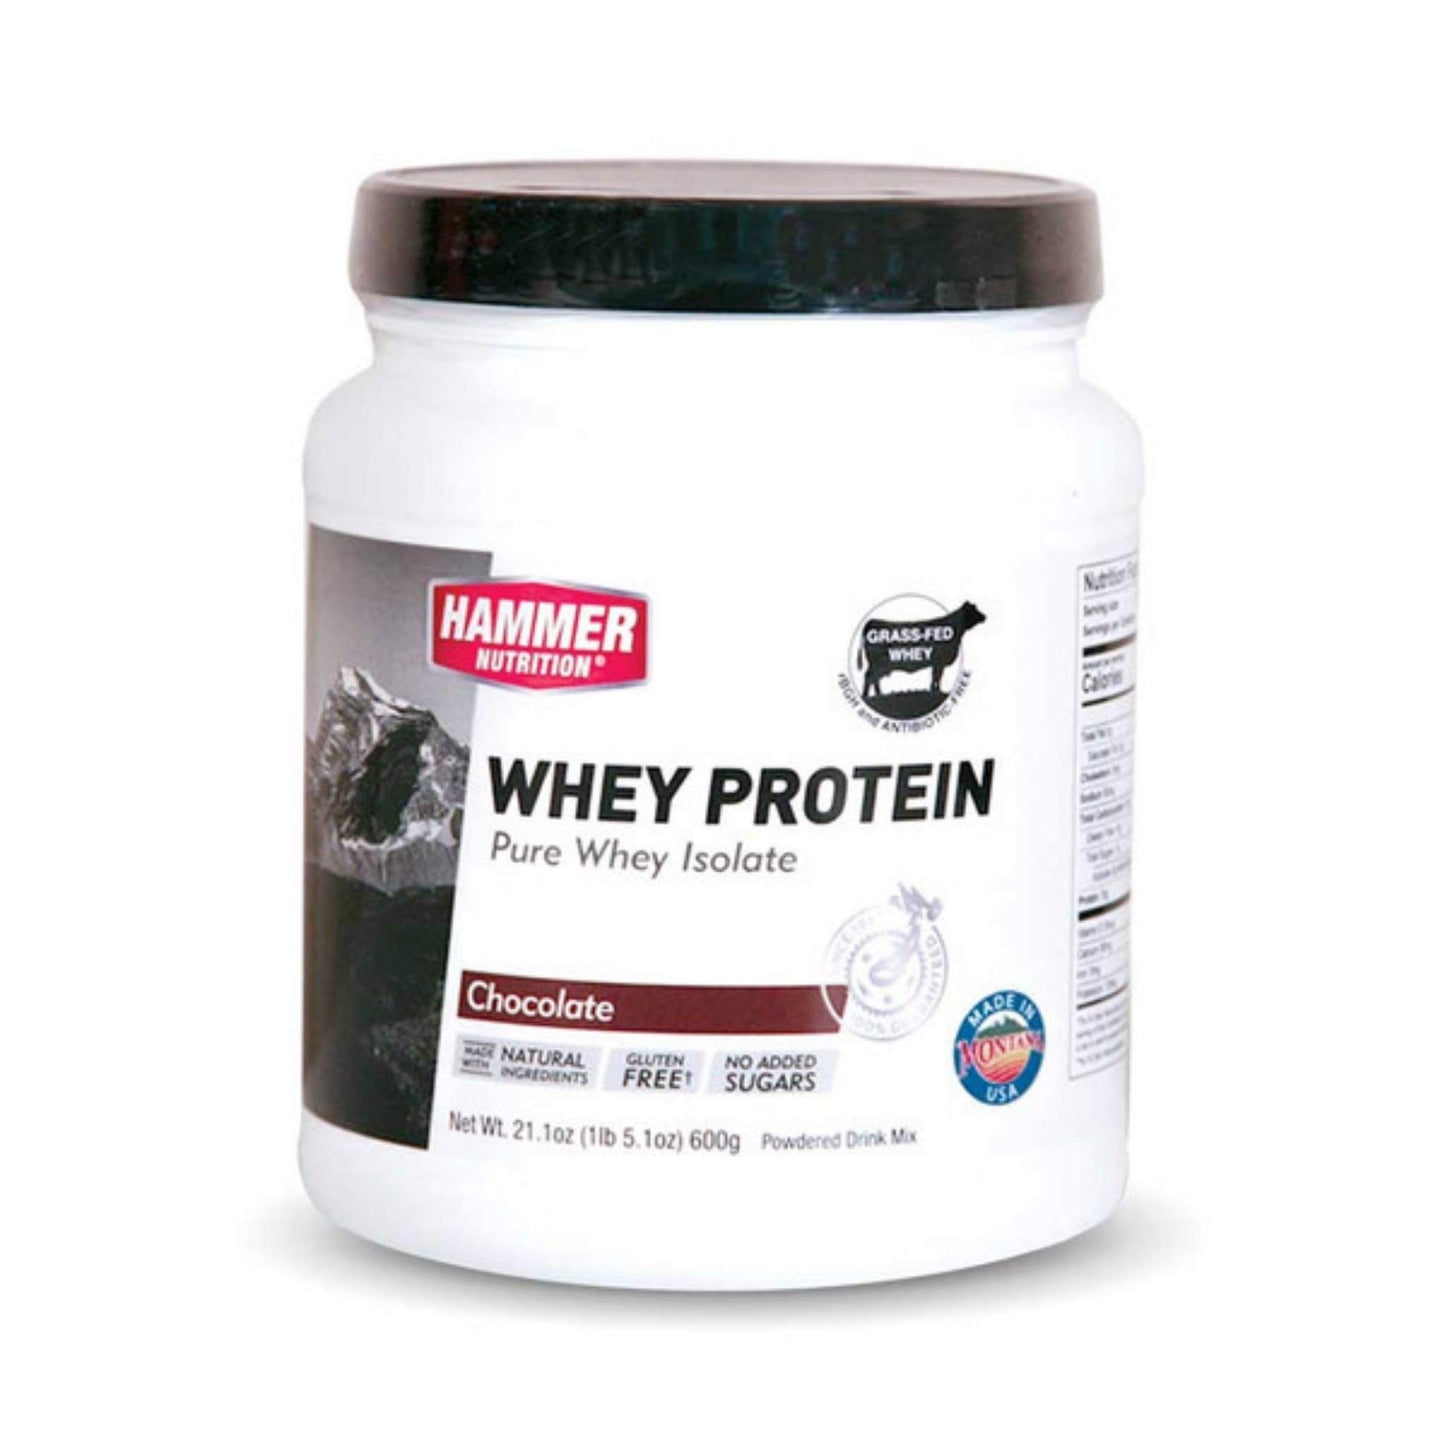 Hammer Nutrition - Whey Protein, Chocolate, 24 Servings, Team Perfect